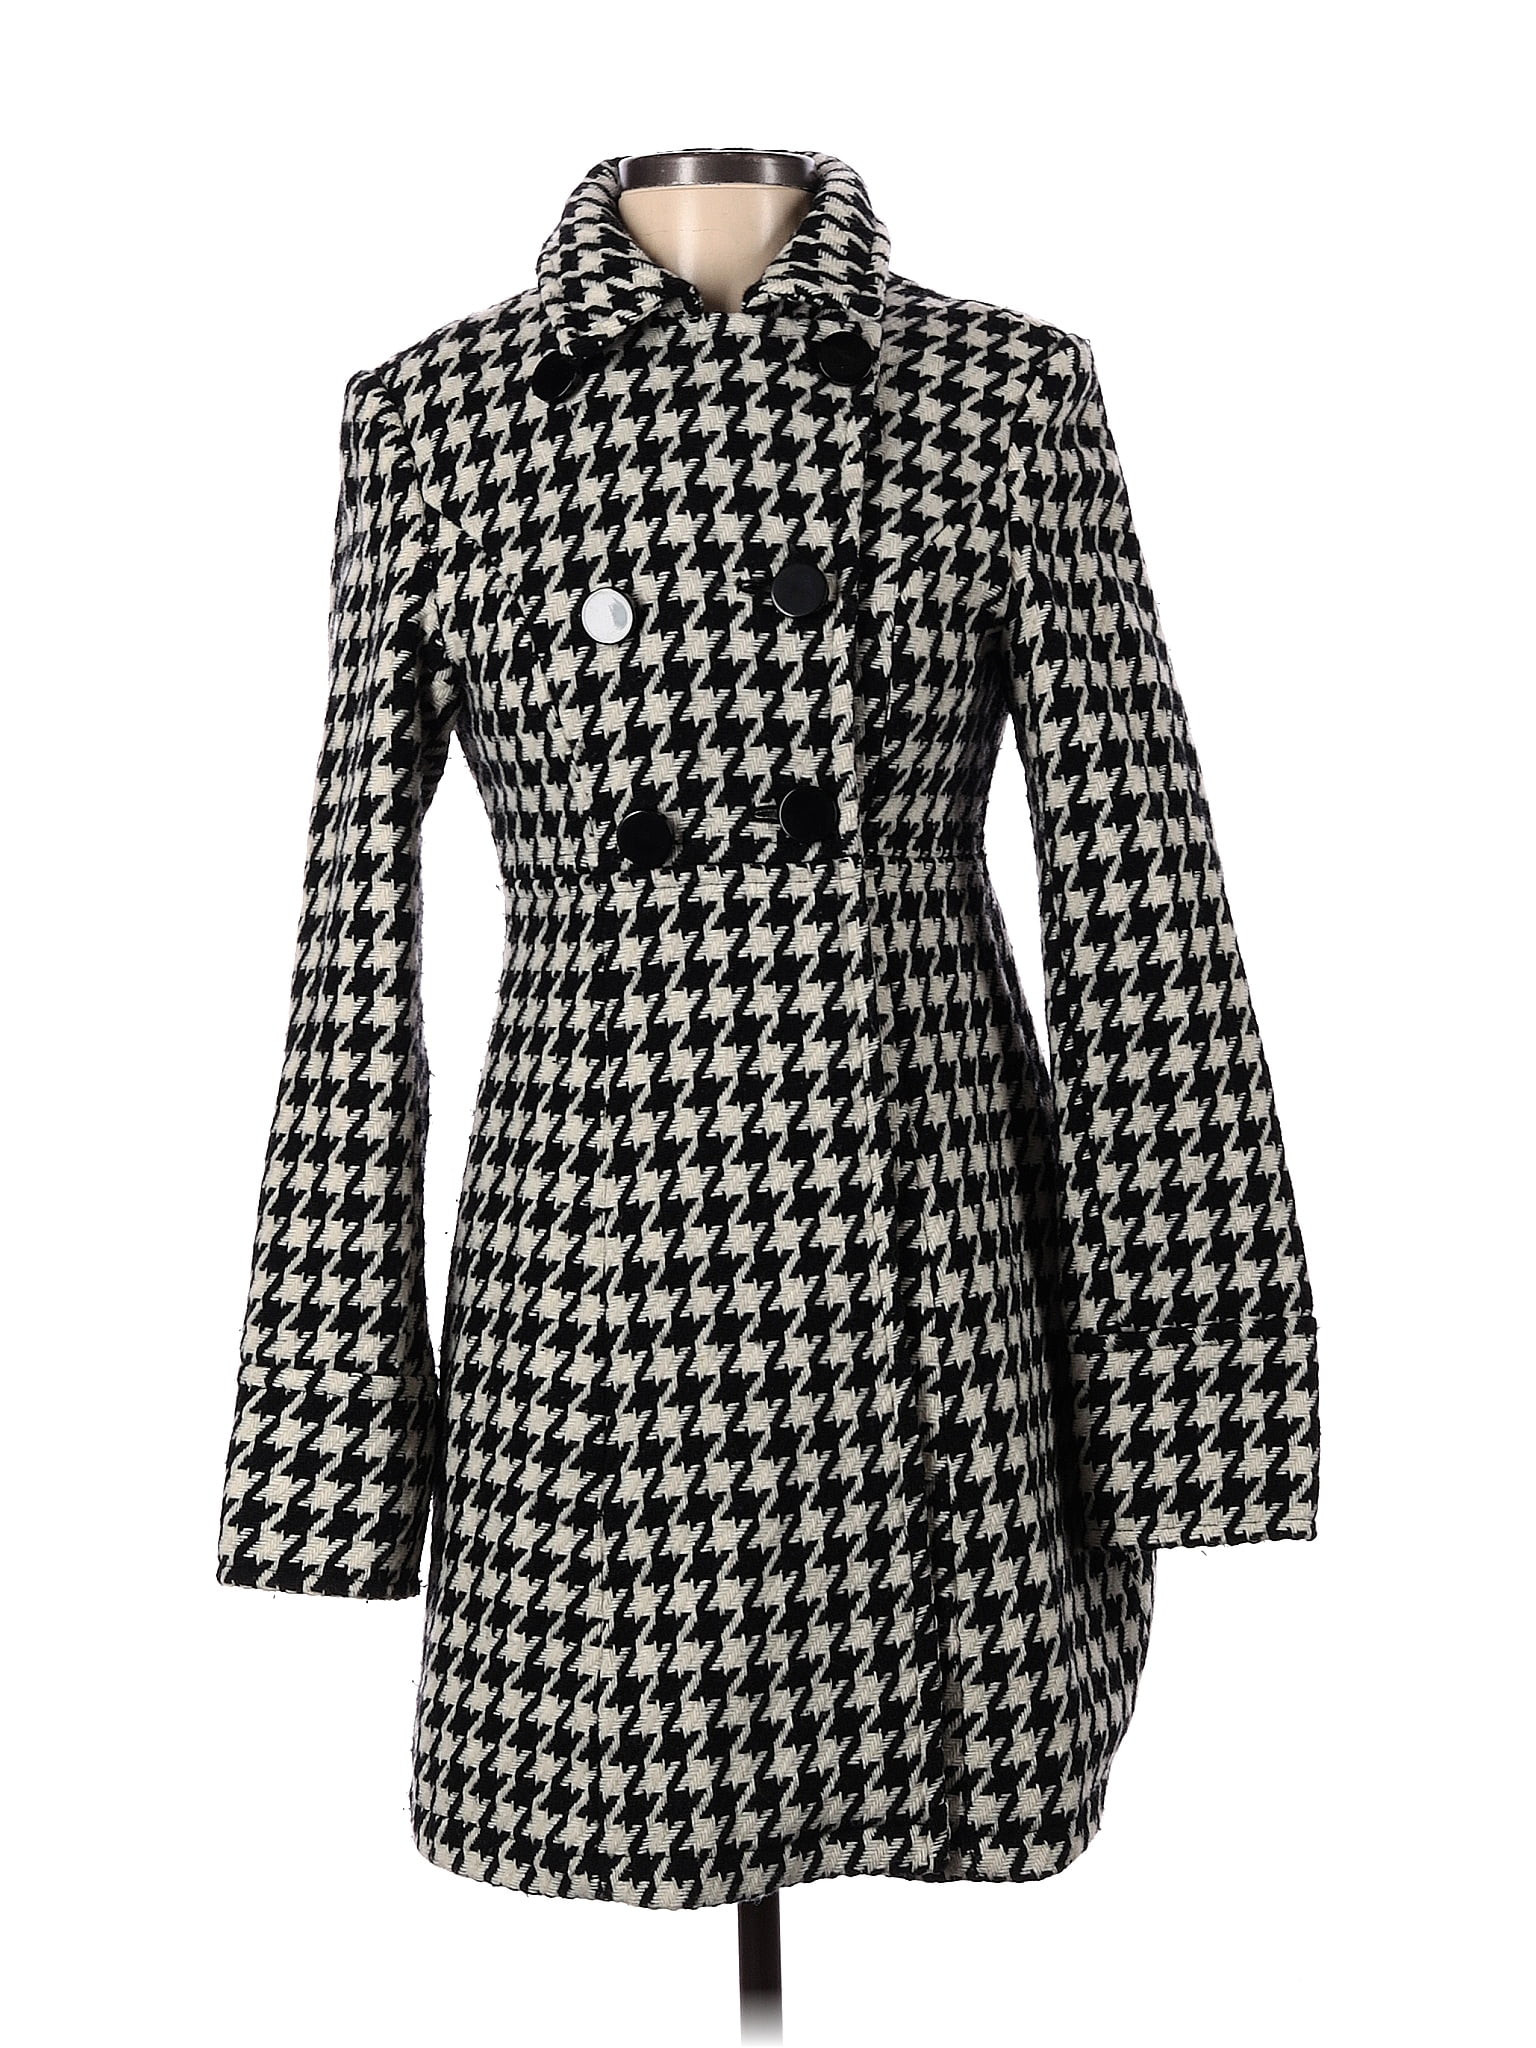 Express Houndstooth Multi Color Black Wool Coat Size XS - 71% off | thredUP